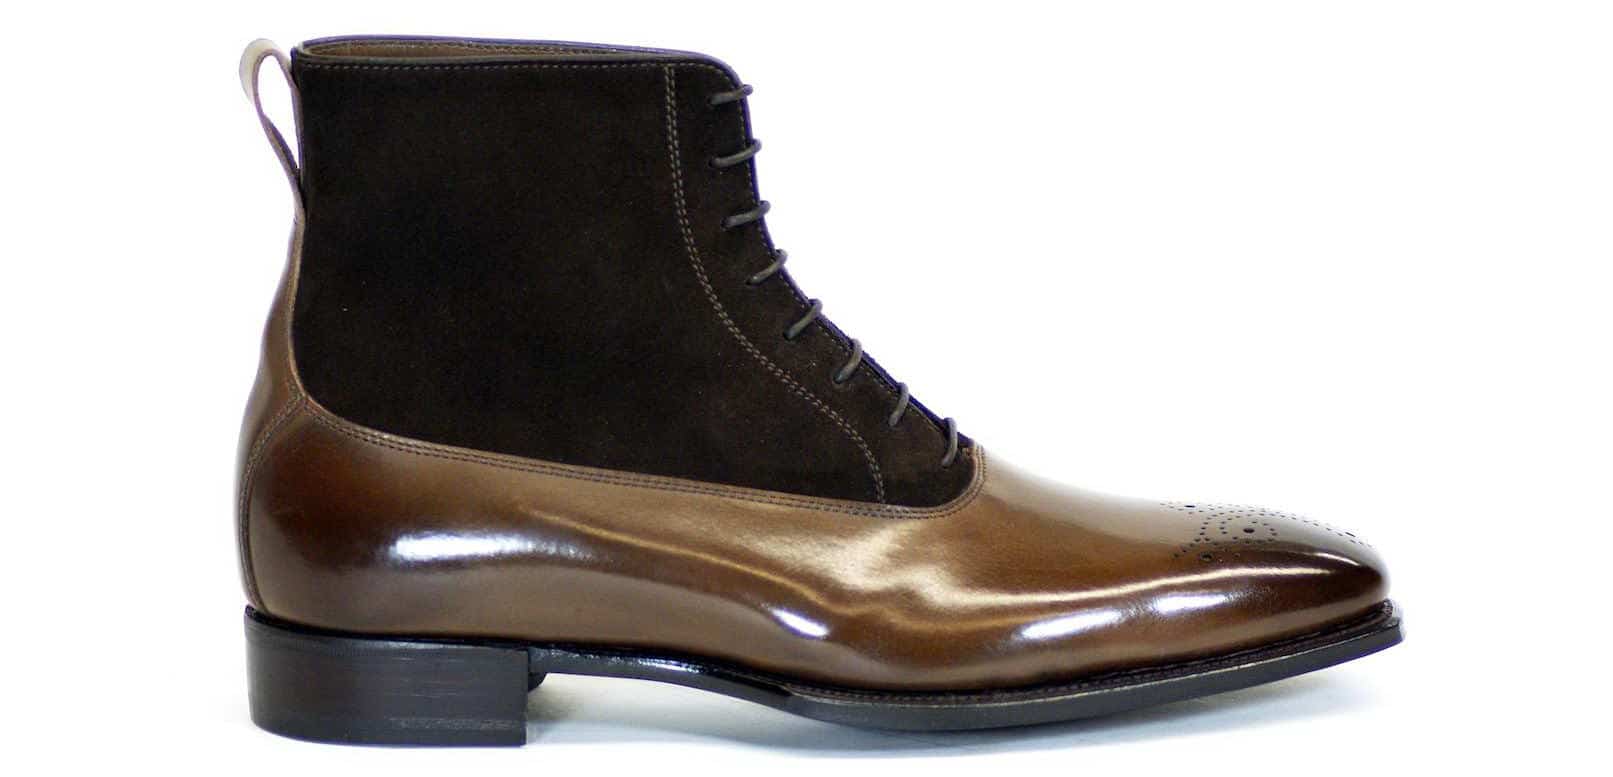 Balmoral Boots Guide